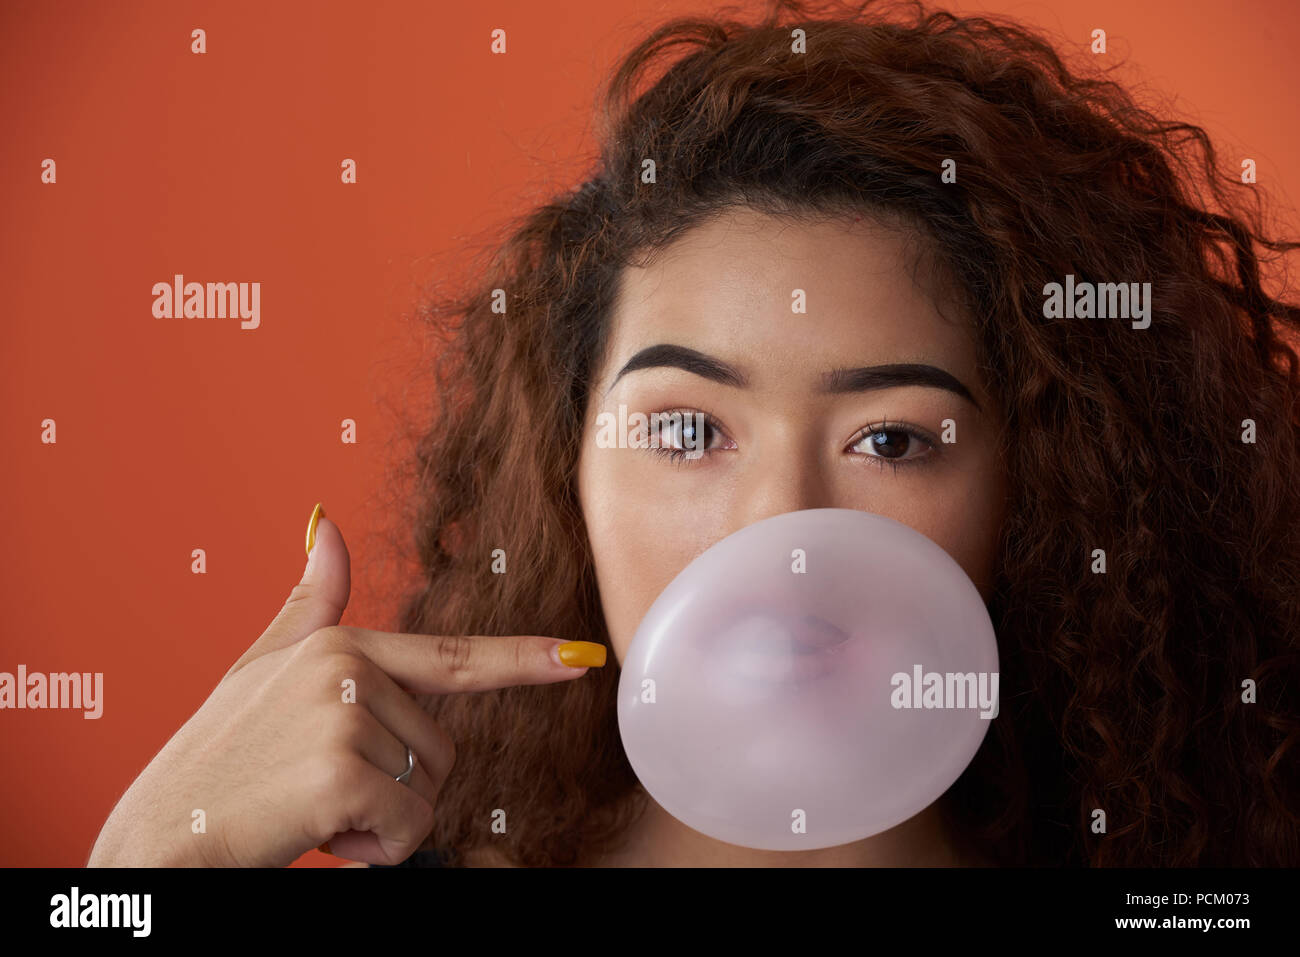 Headshot of woman with bubble gum ball in studio orange color background Stock Photo